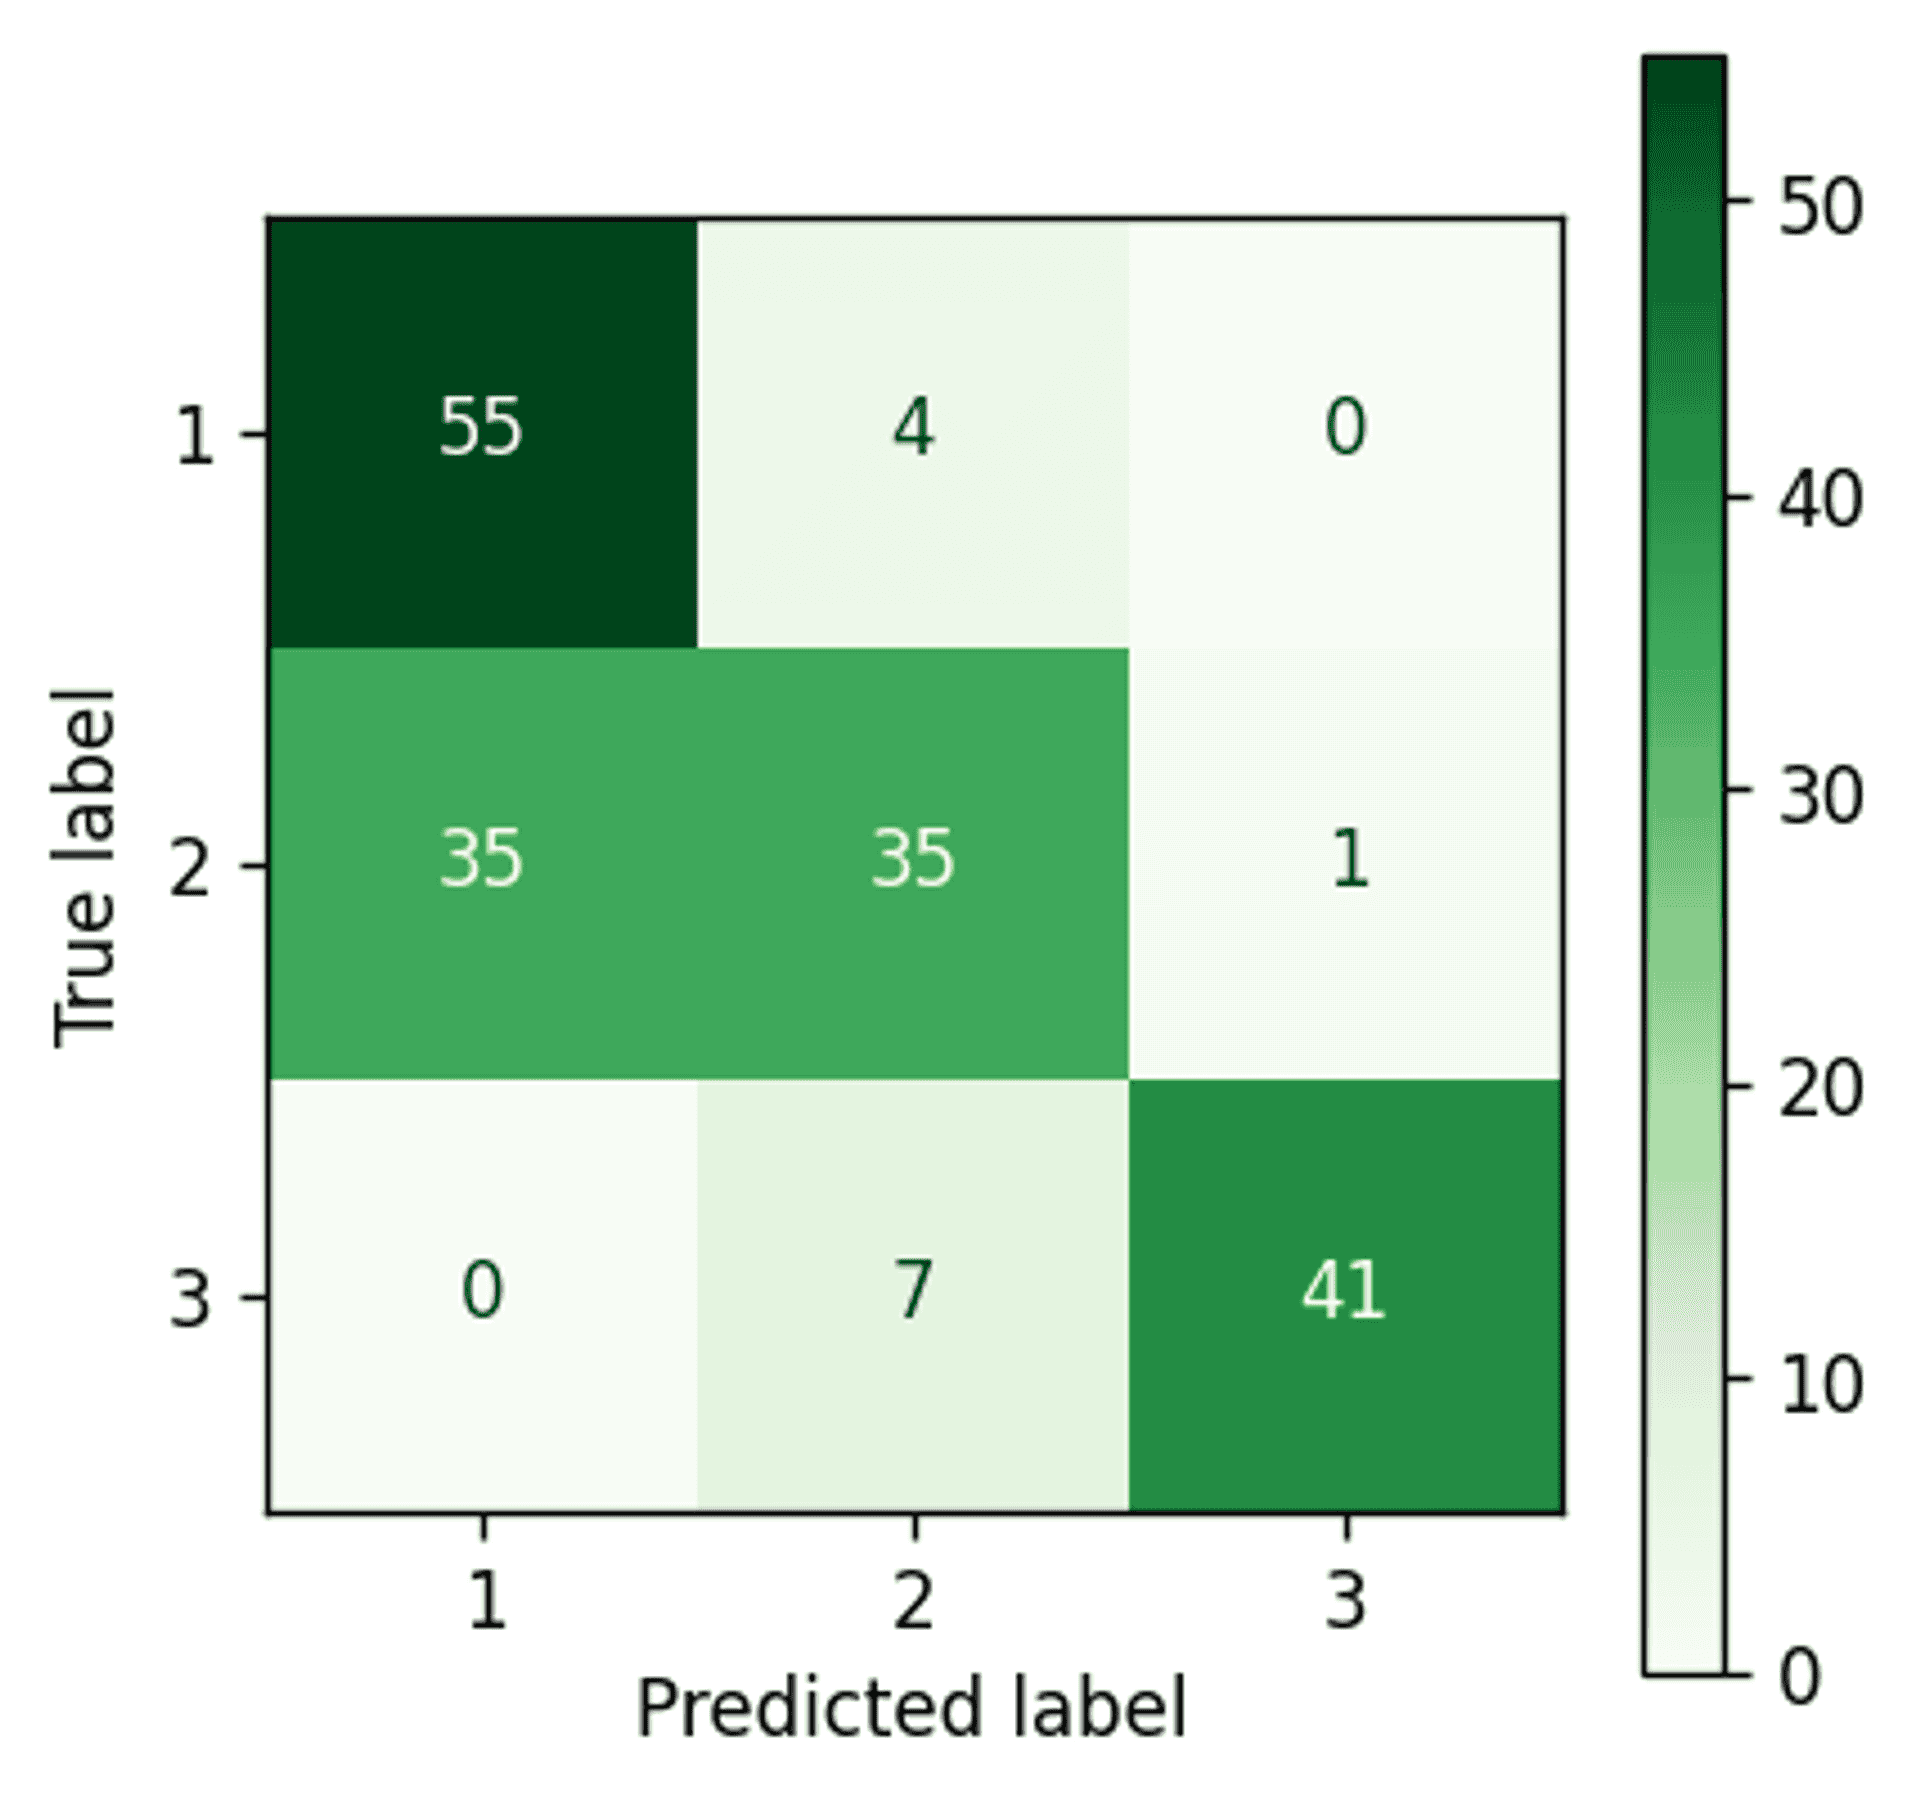 Confusion matrix for the K-Means - Reduced features